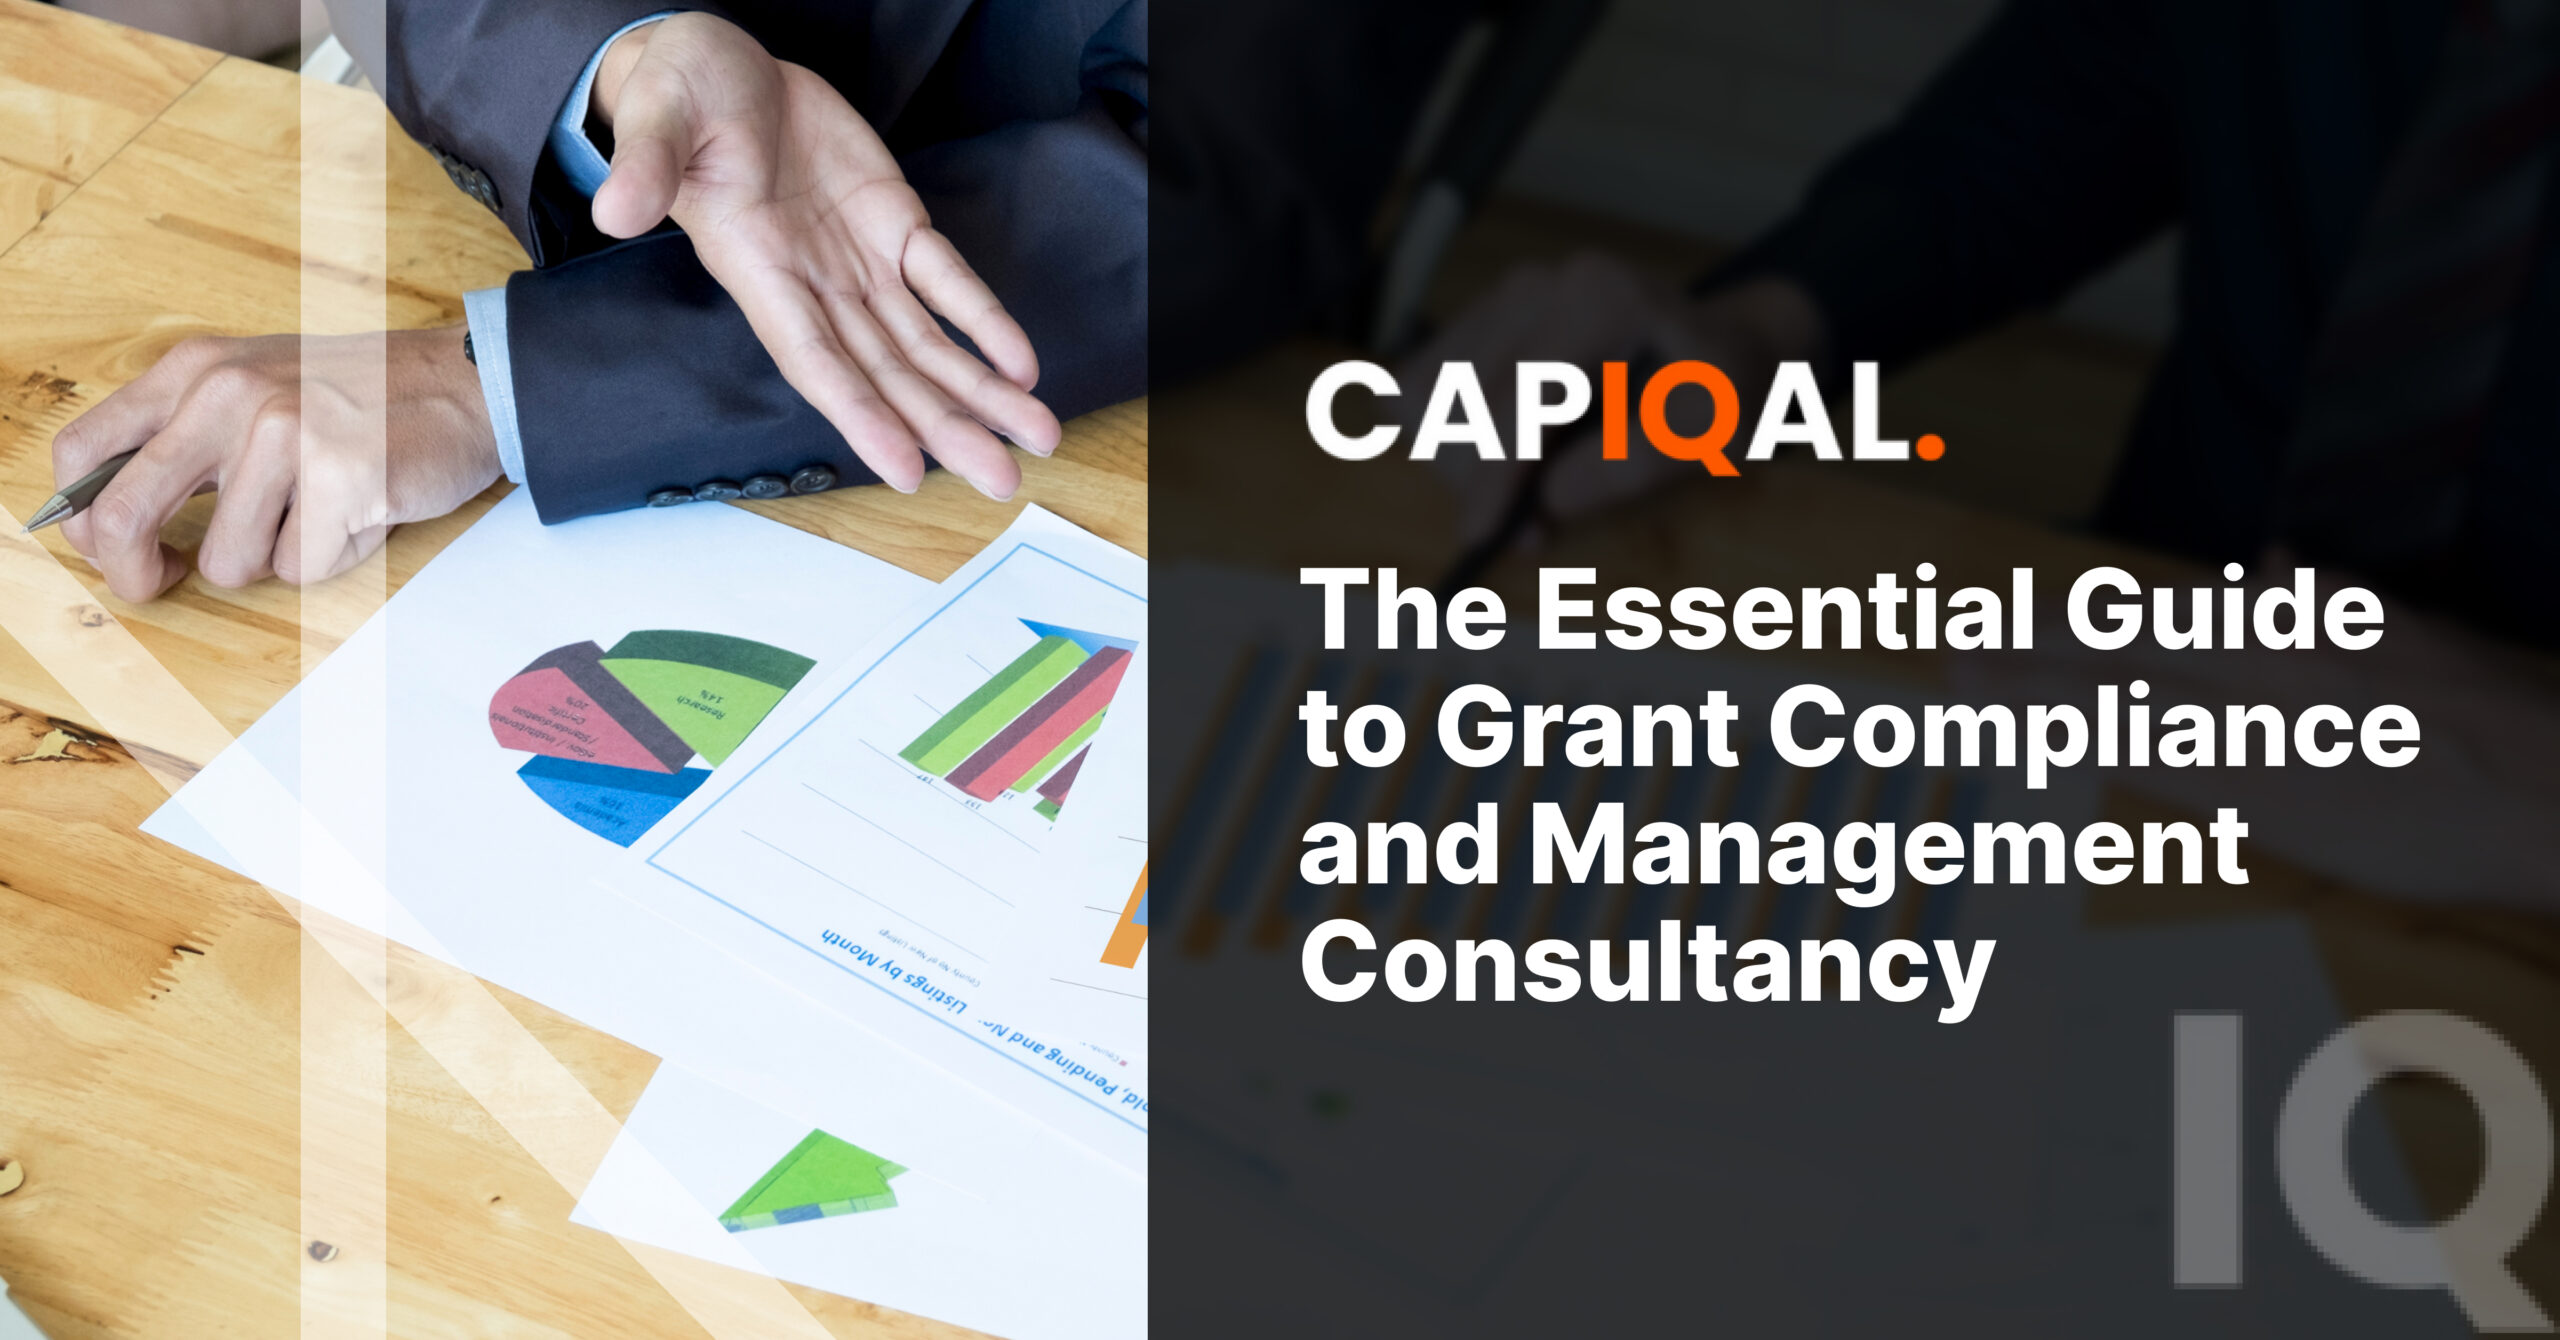 The Essential Guide to Grant Compliance and Management Consultancy